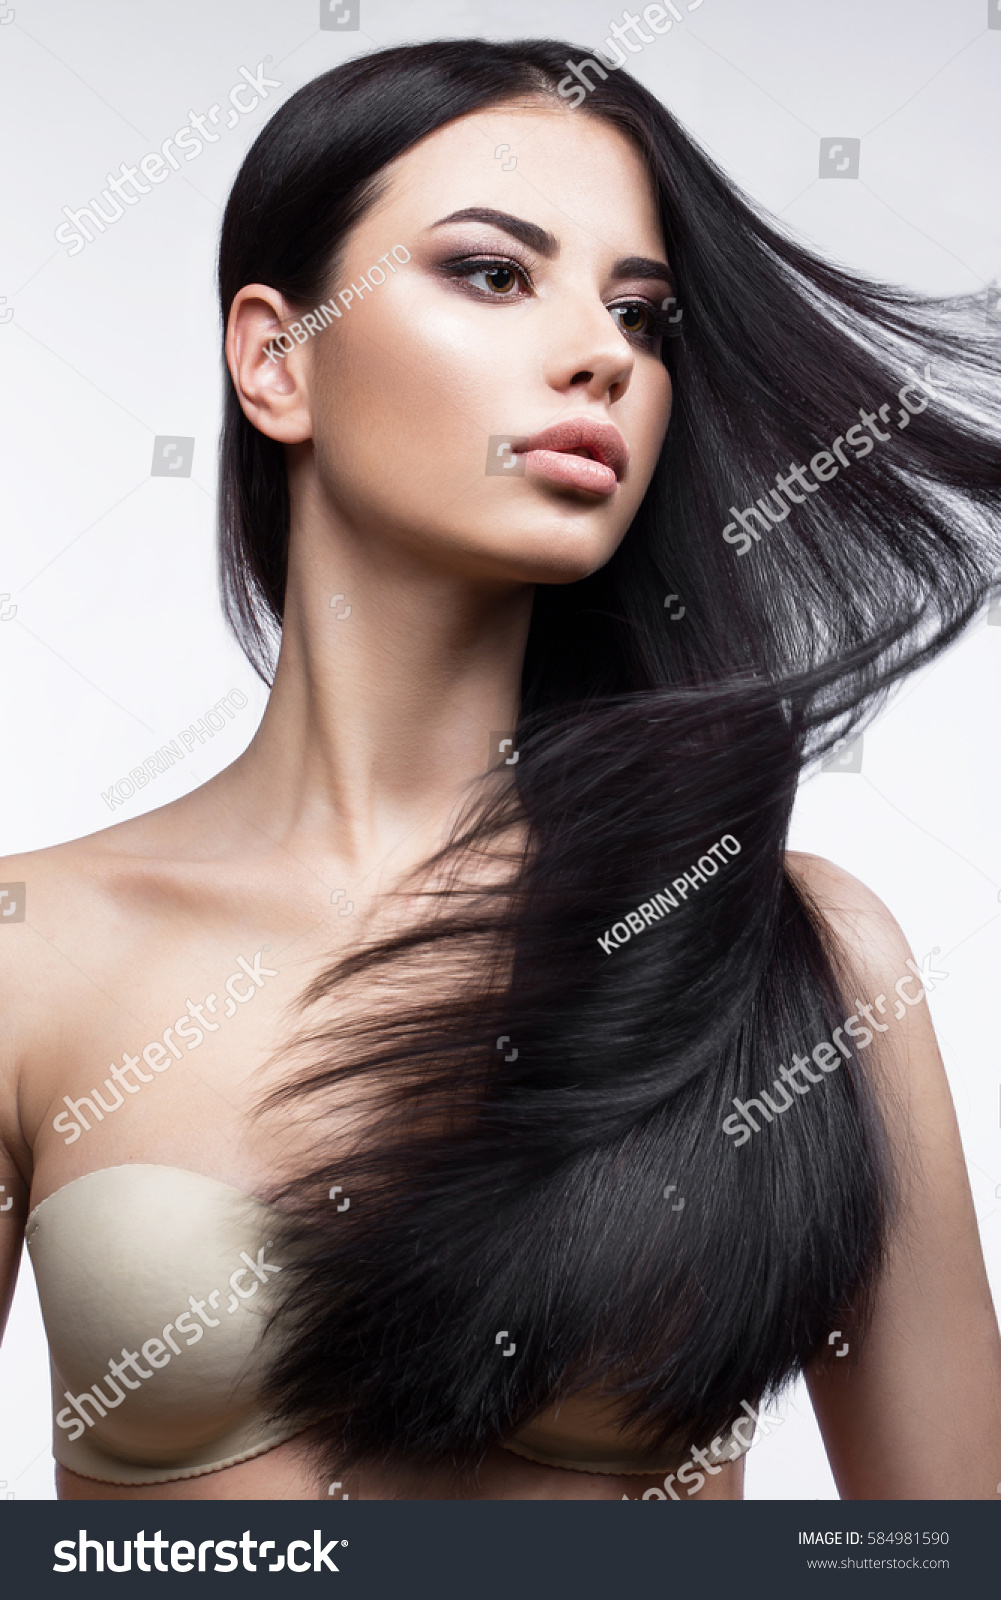 Beautiful Brunette Girl Move Perfectly Smooth写真素材584981590 Shutterstock